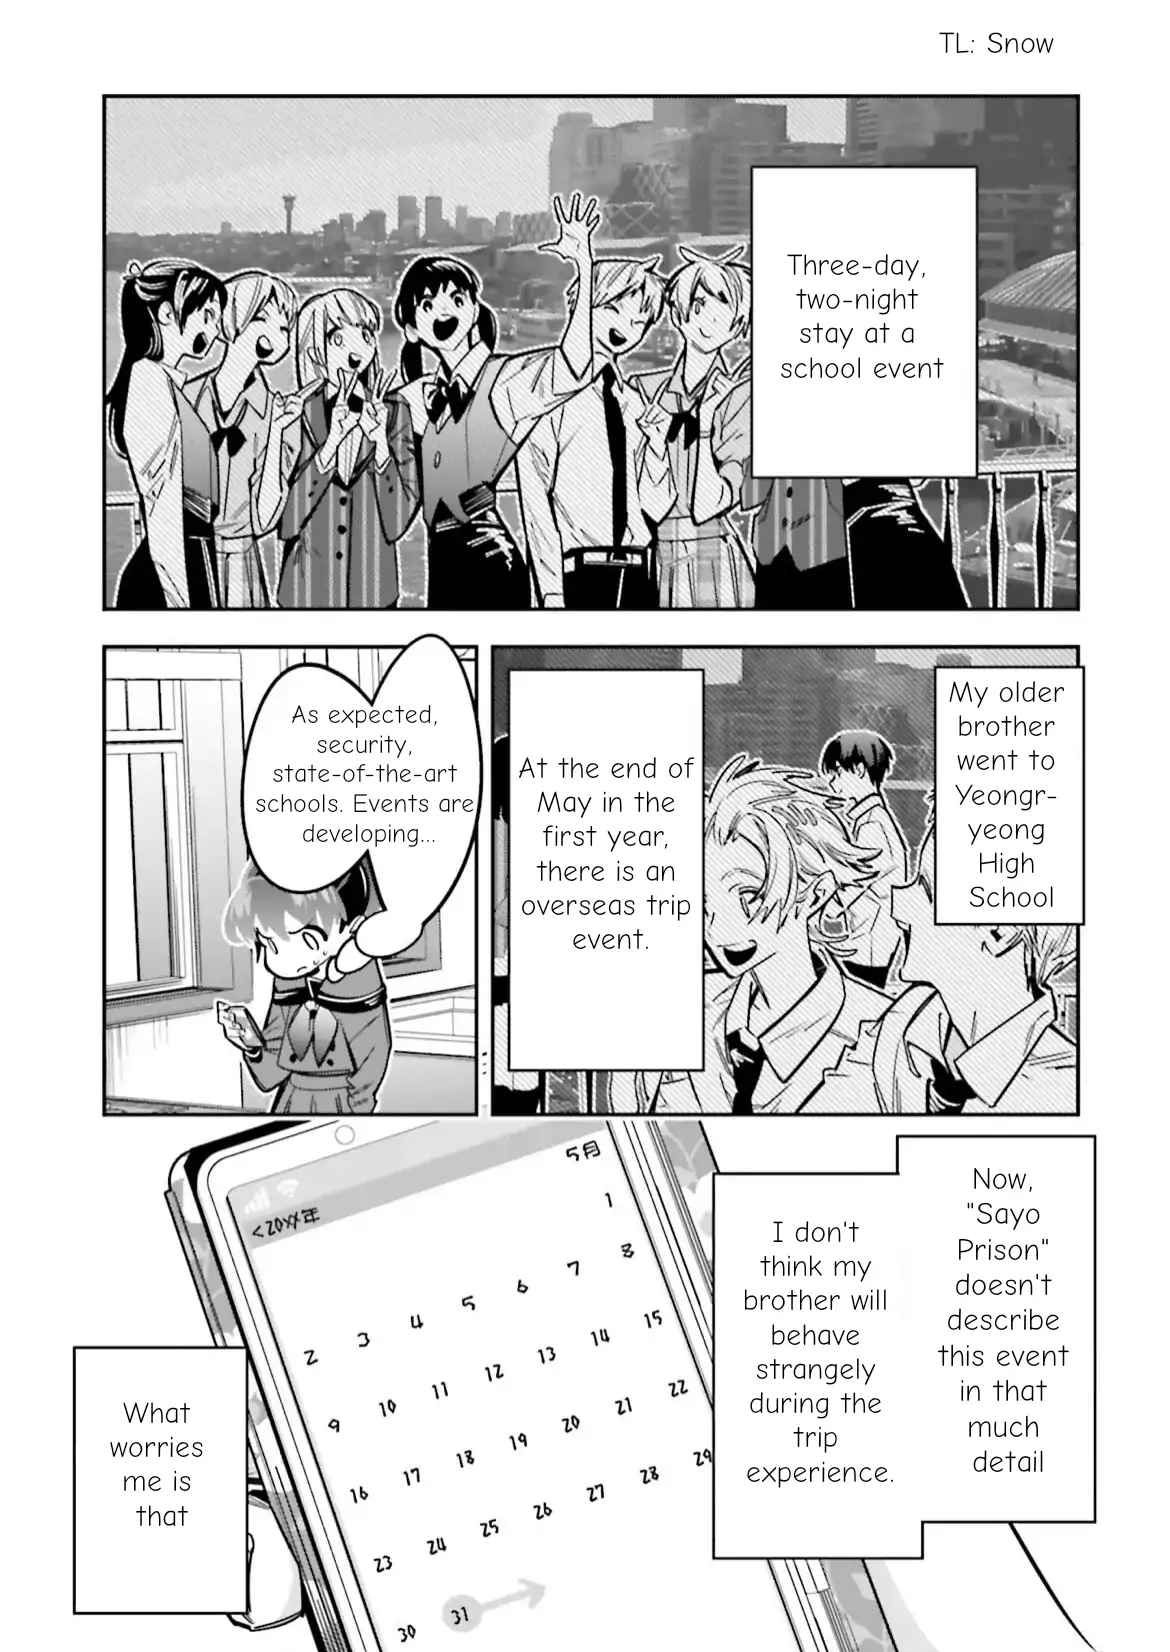 I Reincarnated As The Little Sister Of A Death Game Manga's Murder Mastermind And Failed - chapter 8 - #3